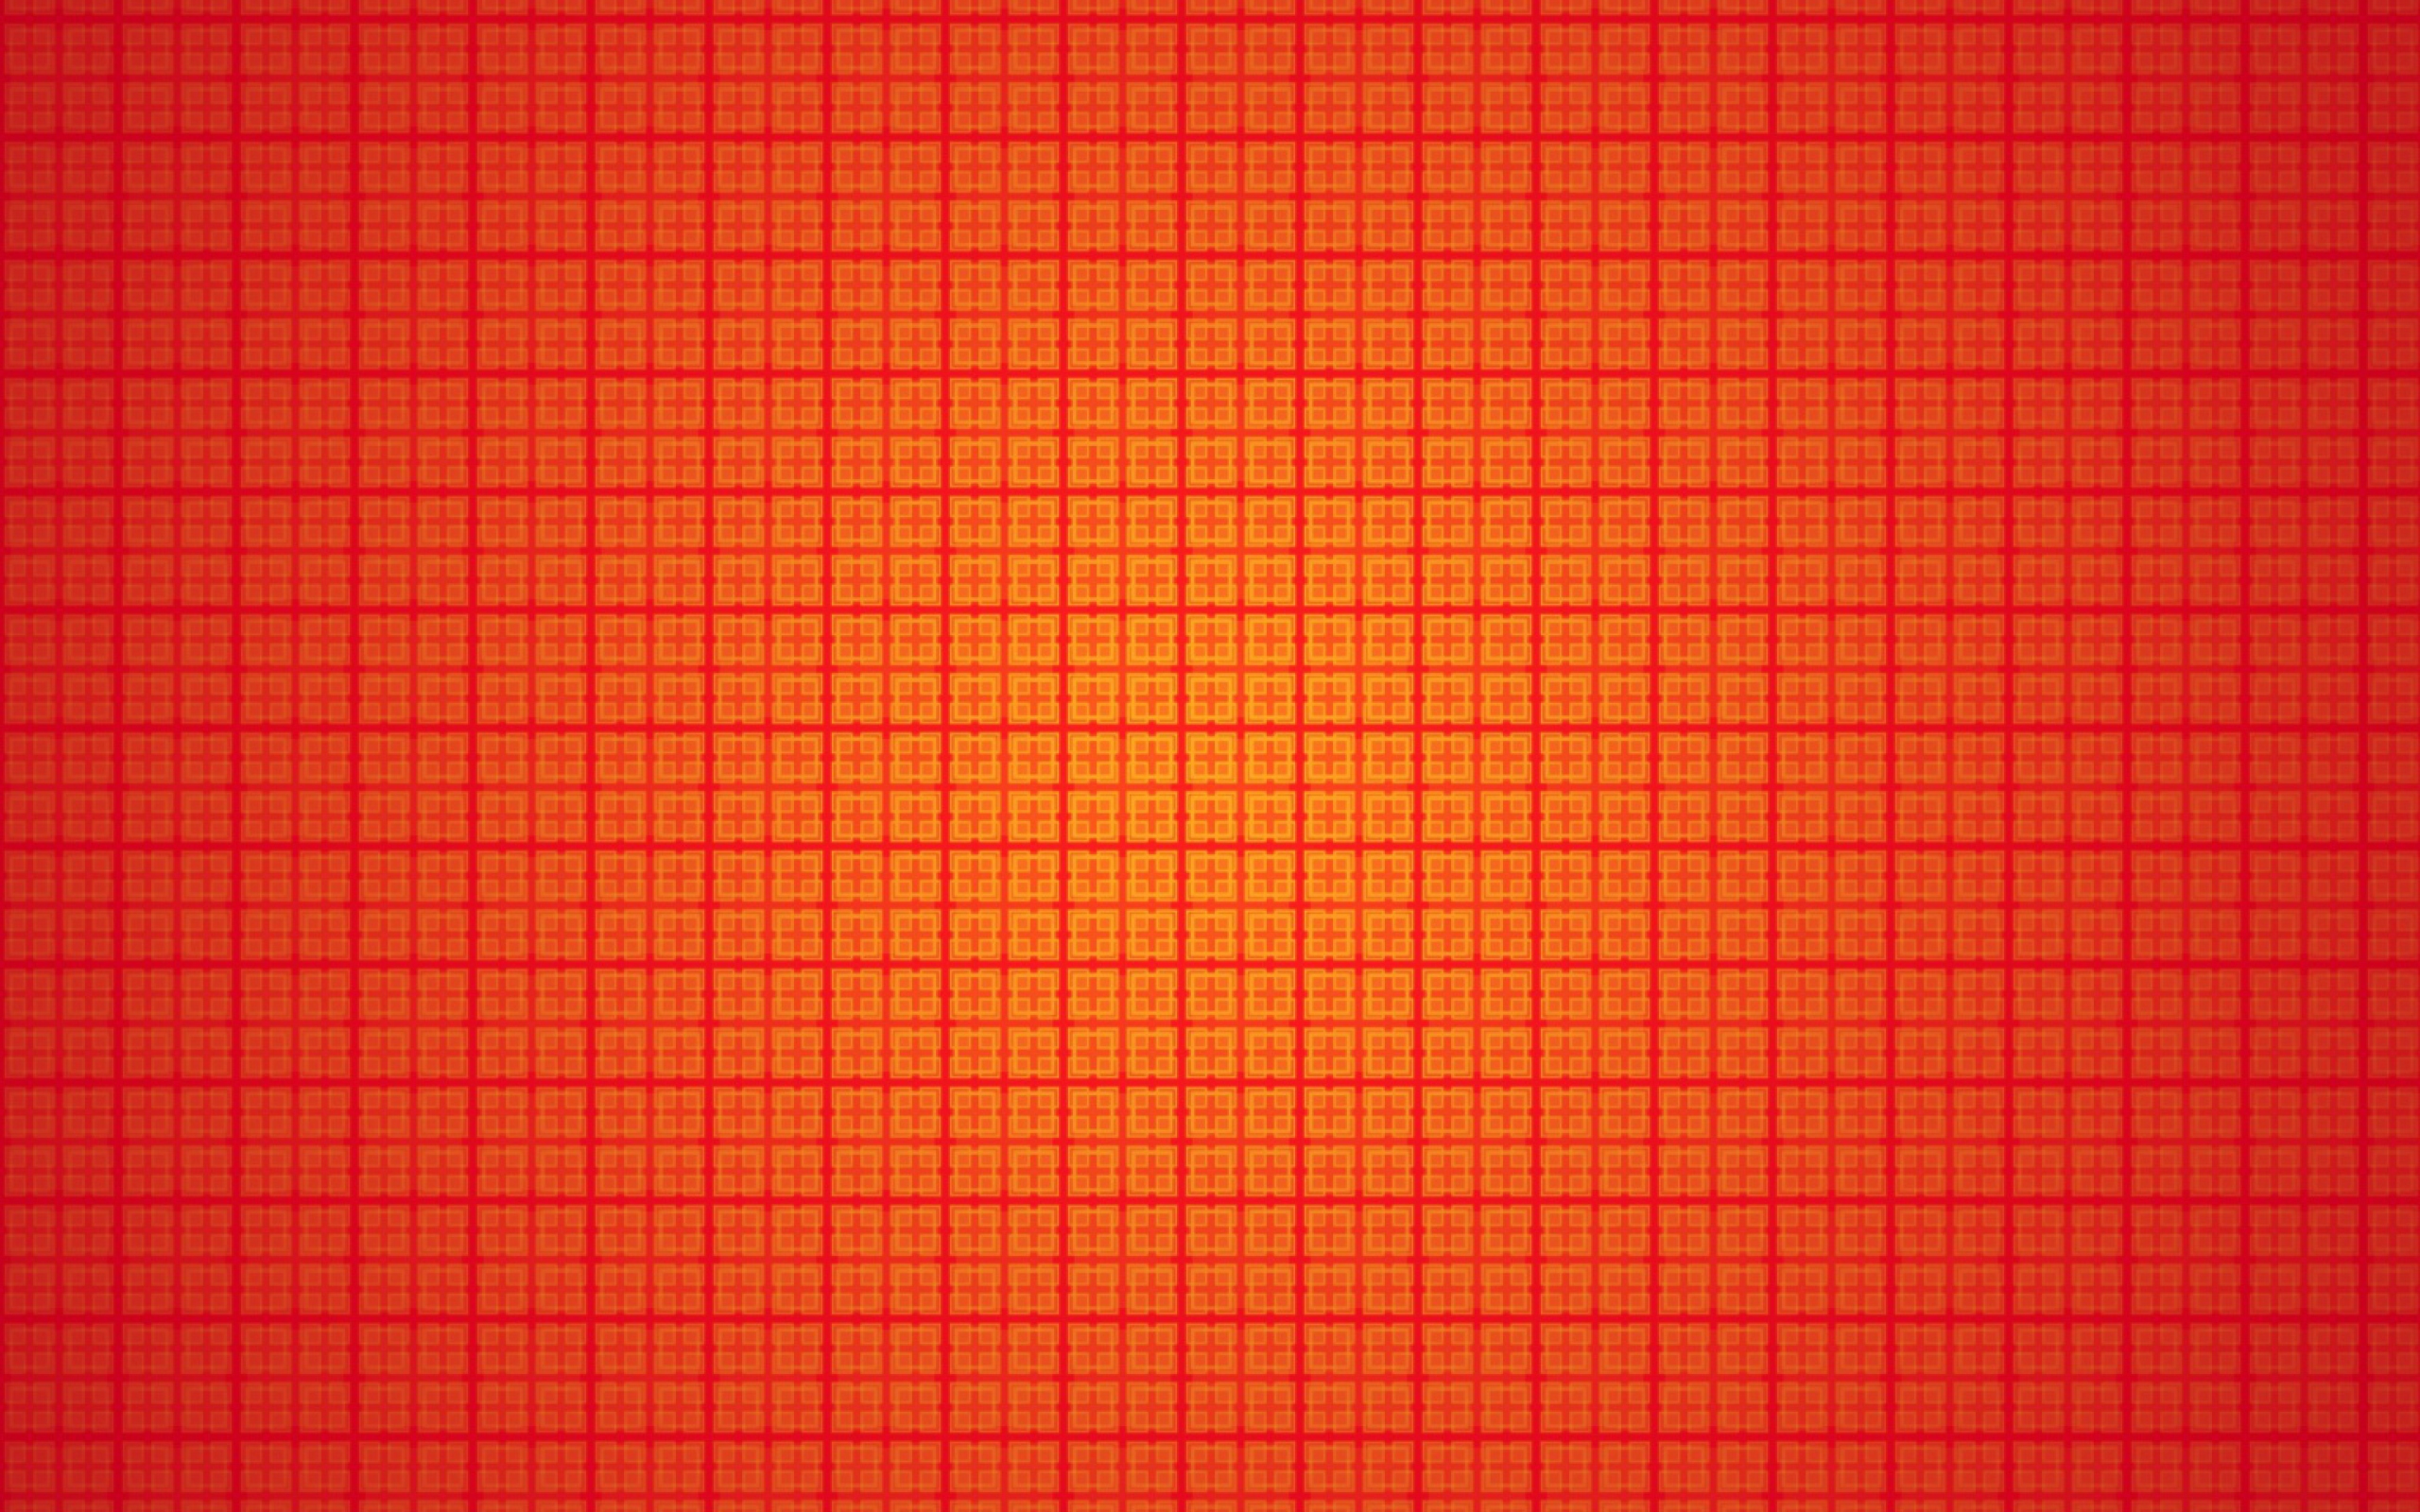 Orange Squares Wallpaper for Android 2560x1600.